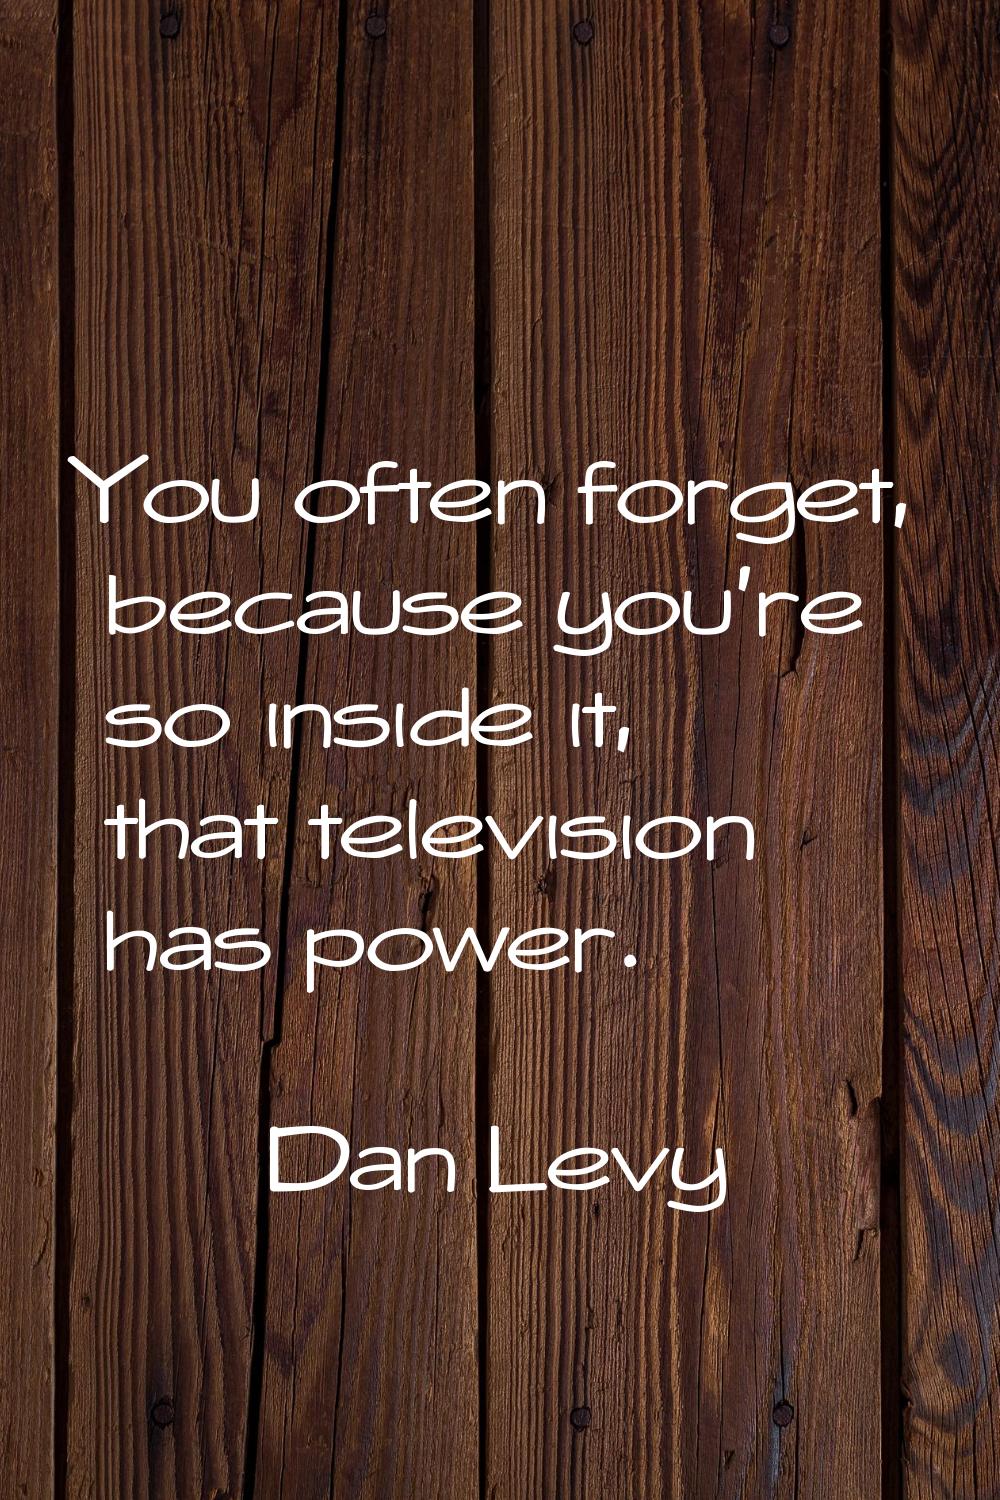 You often forget, because you're so inside it, that television has power.